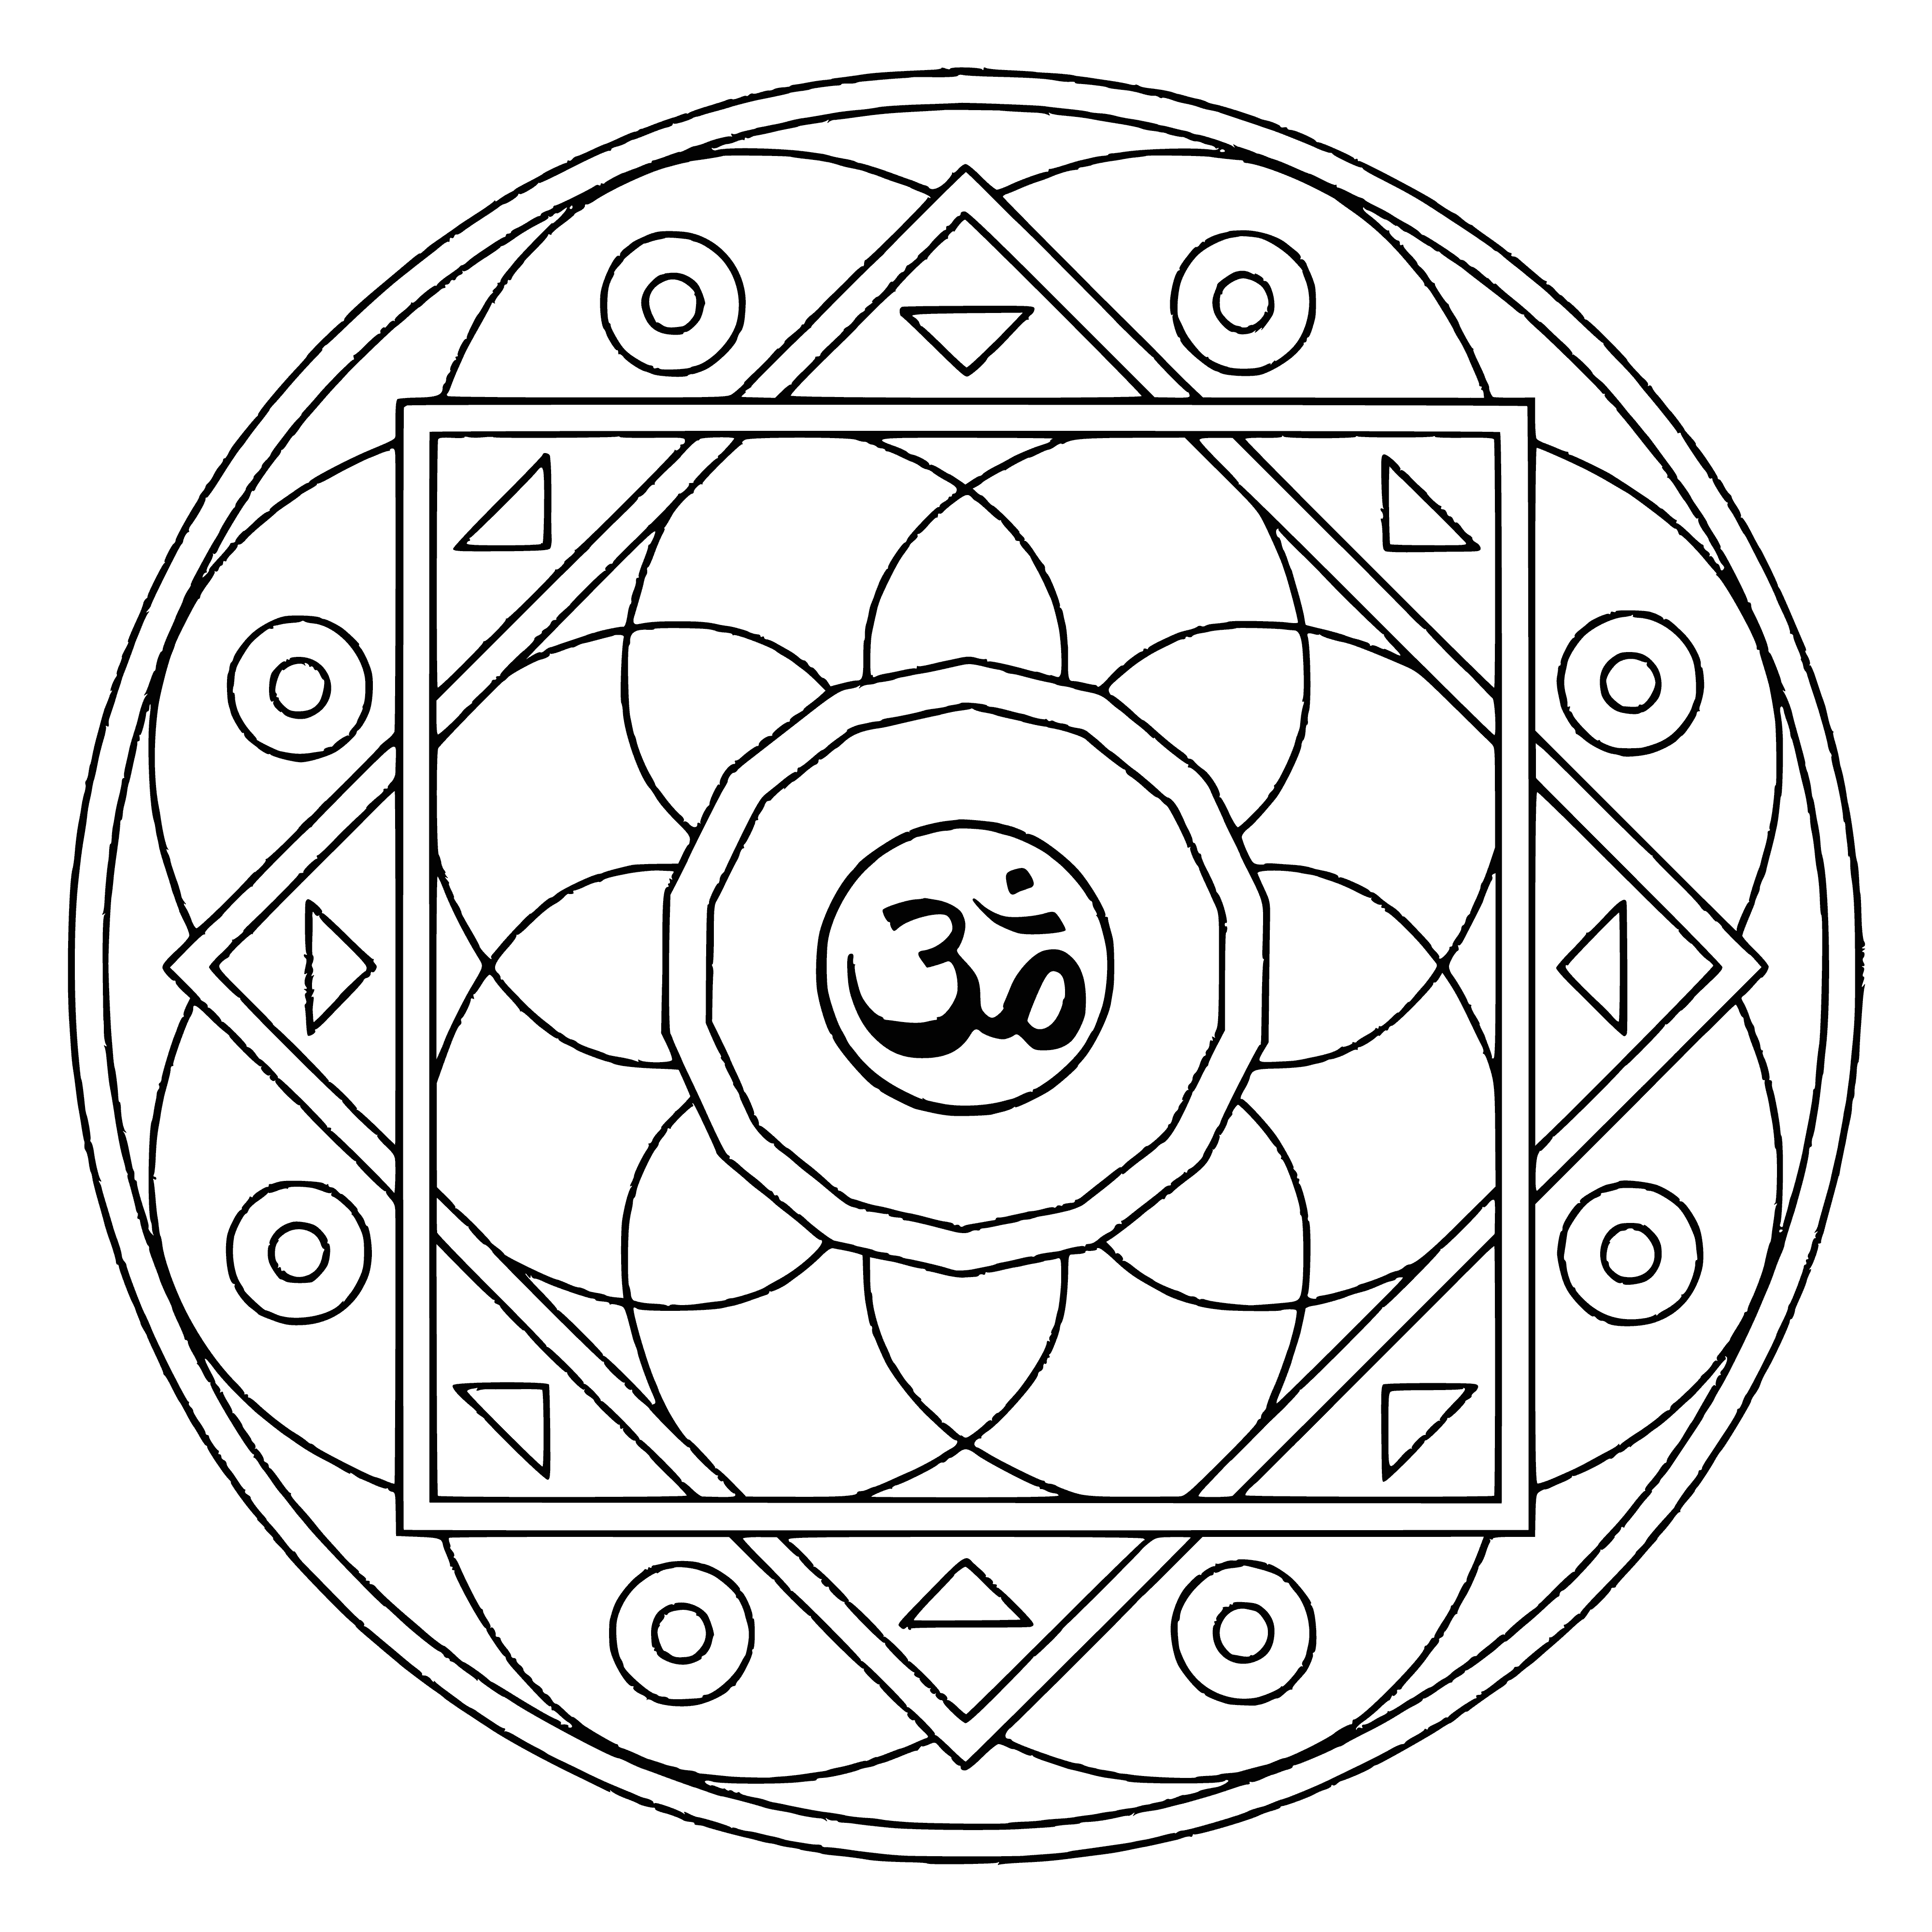 coloring page: Mandalas represent the interconnectedness of all life, and the Om symbol is a reminder of this; it's reminder of our connection to the universe. #yogalife